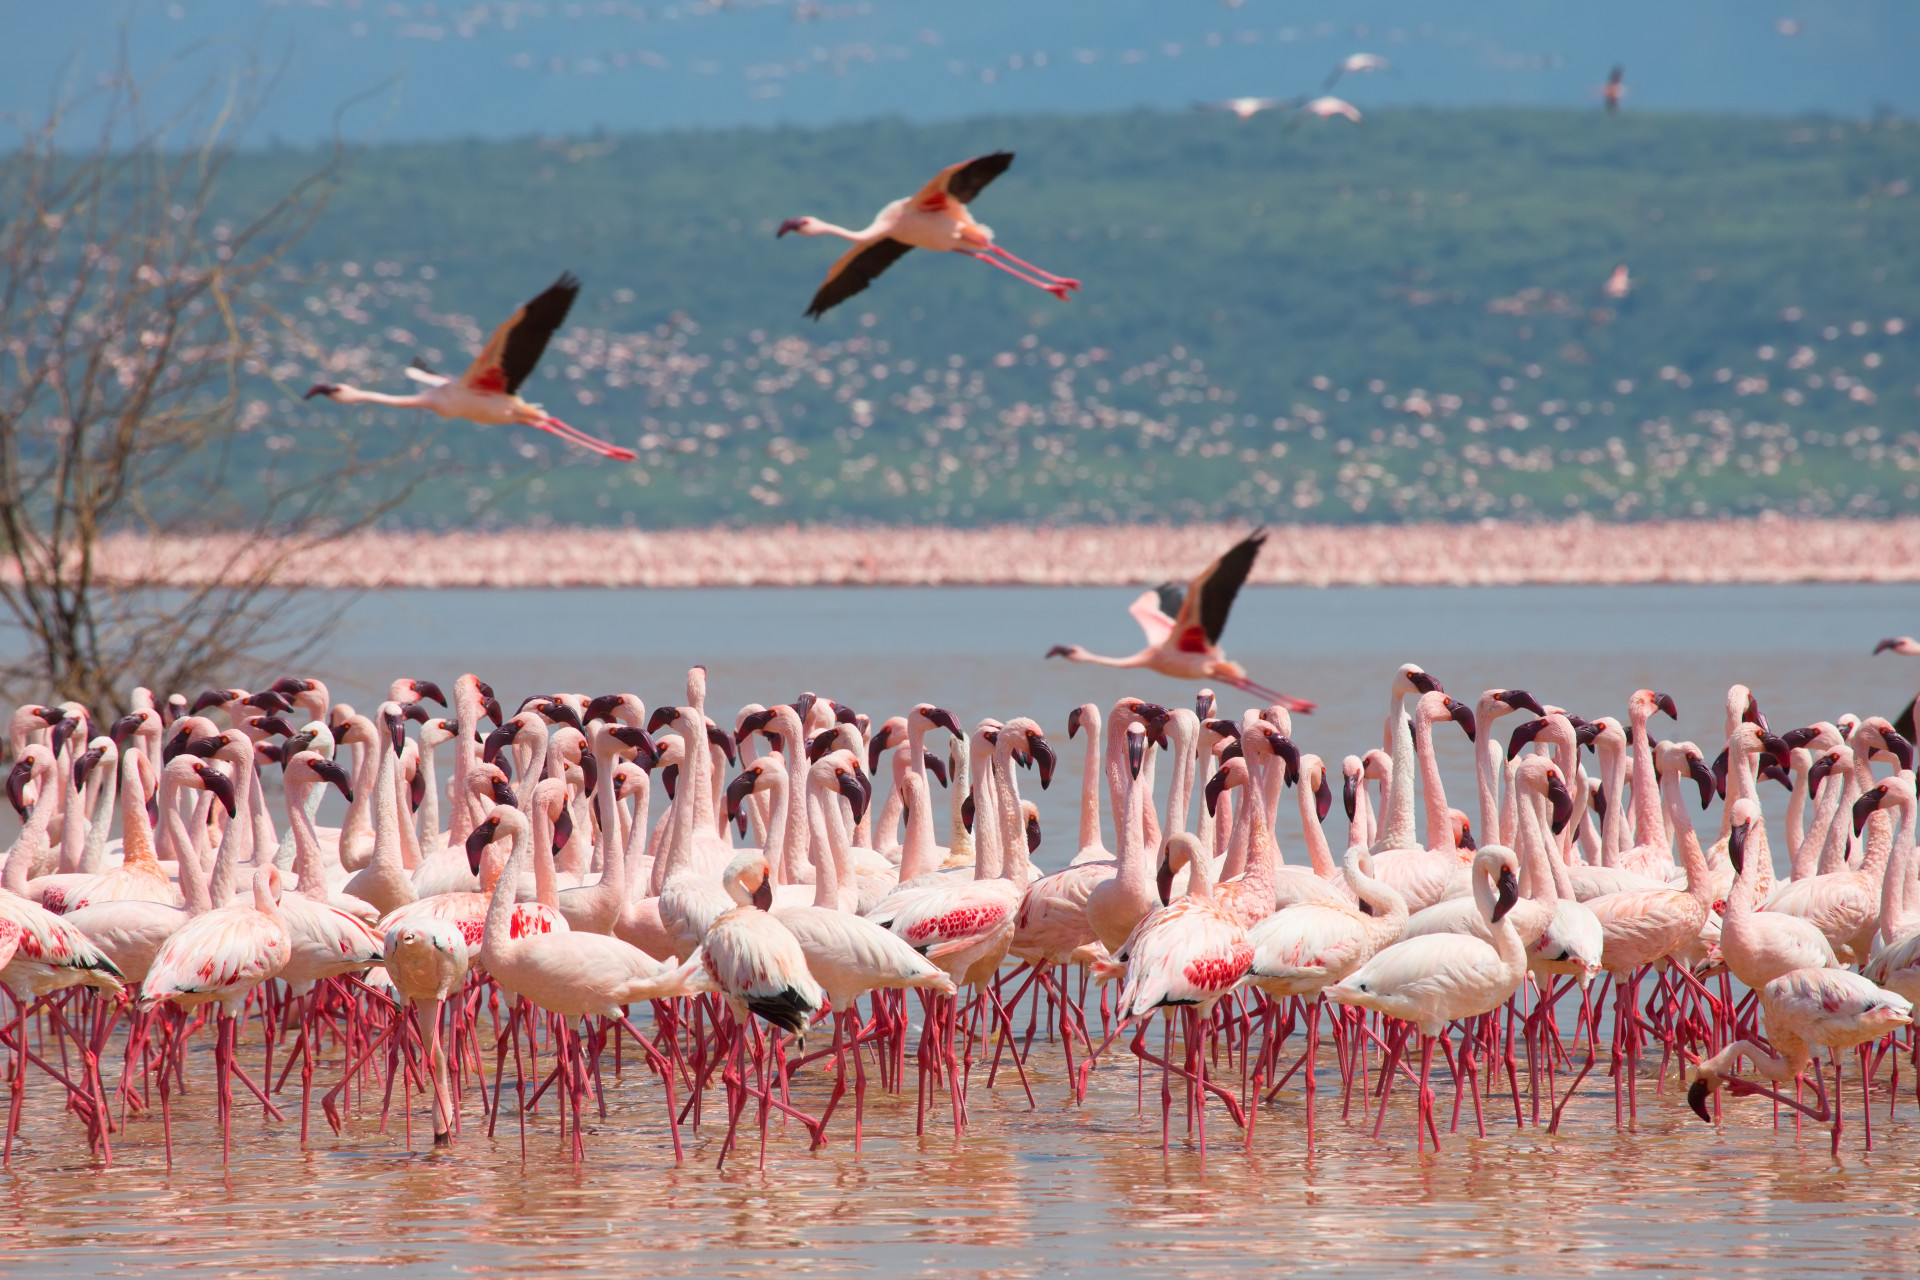 In this Kenyan city you can watch the amazing migratory ritual of flamingos. A spectacle worth witnessing at least once in your life.<p><a href="https://www.msn.com/en-us/community/channel/vid-7xx8mnucu55yw63we9va2gwr7uihbxwc68fxqp25x6tg4ftibpra?cvid=94631541bc0f4f89bfd59158d696ad7e">Follow us and access great exclusive content every day</a></p>